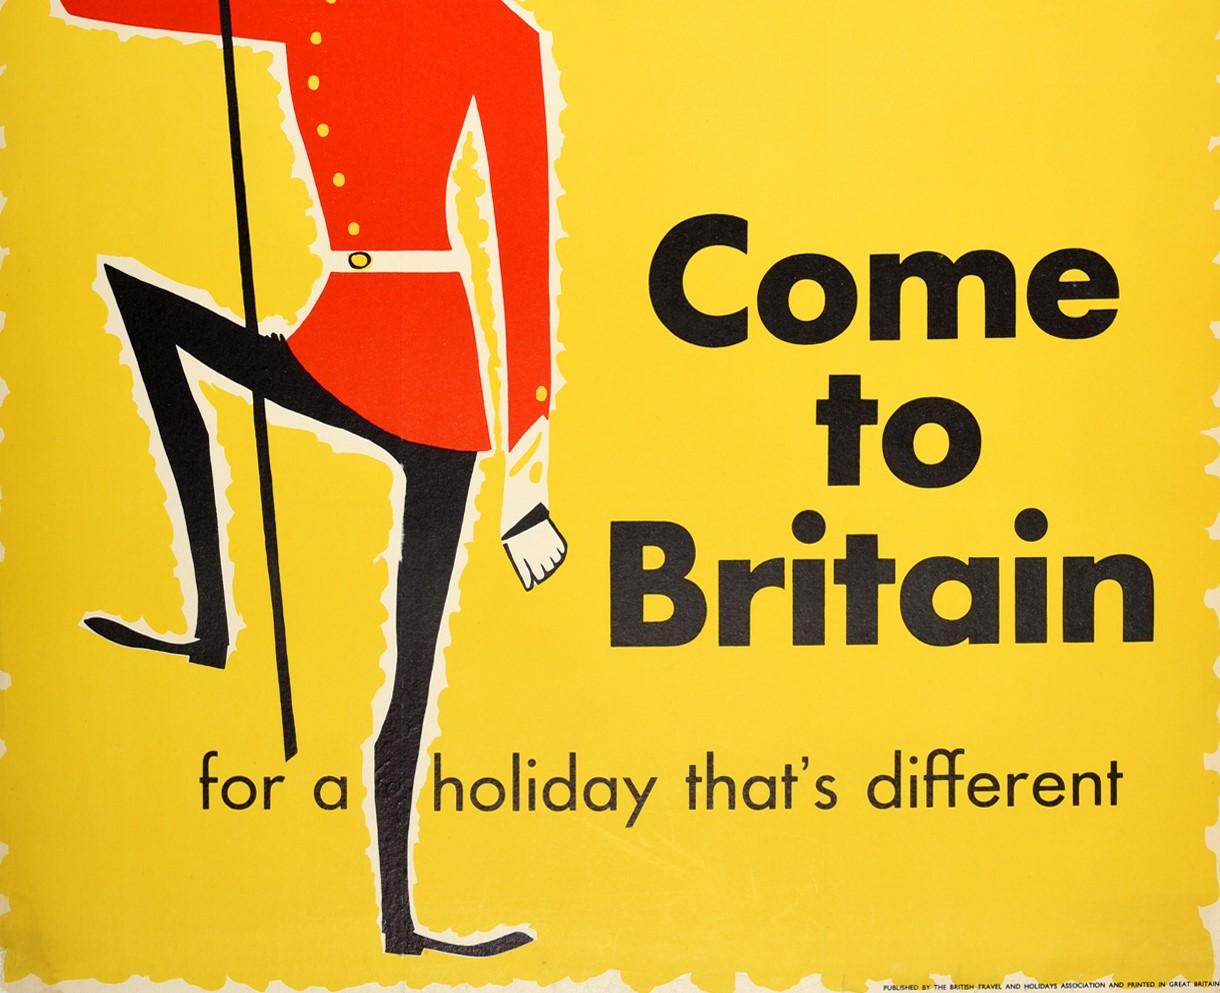 Original vintage travel poster published by the British Travel and Holidays Association – Come to Britain for a holiday that's different – featuring a colourful and fun mid-century design depicting a smiling Royal Guard in red and black uniform